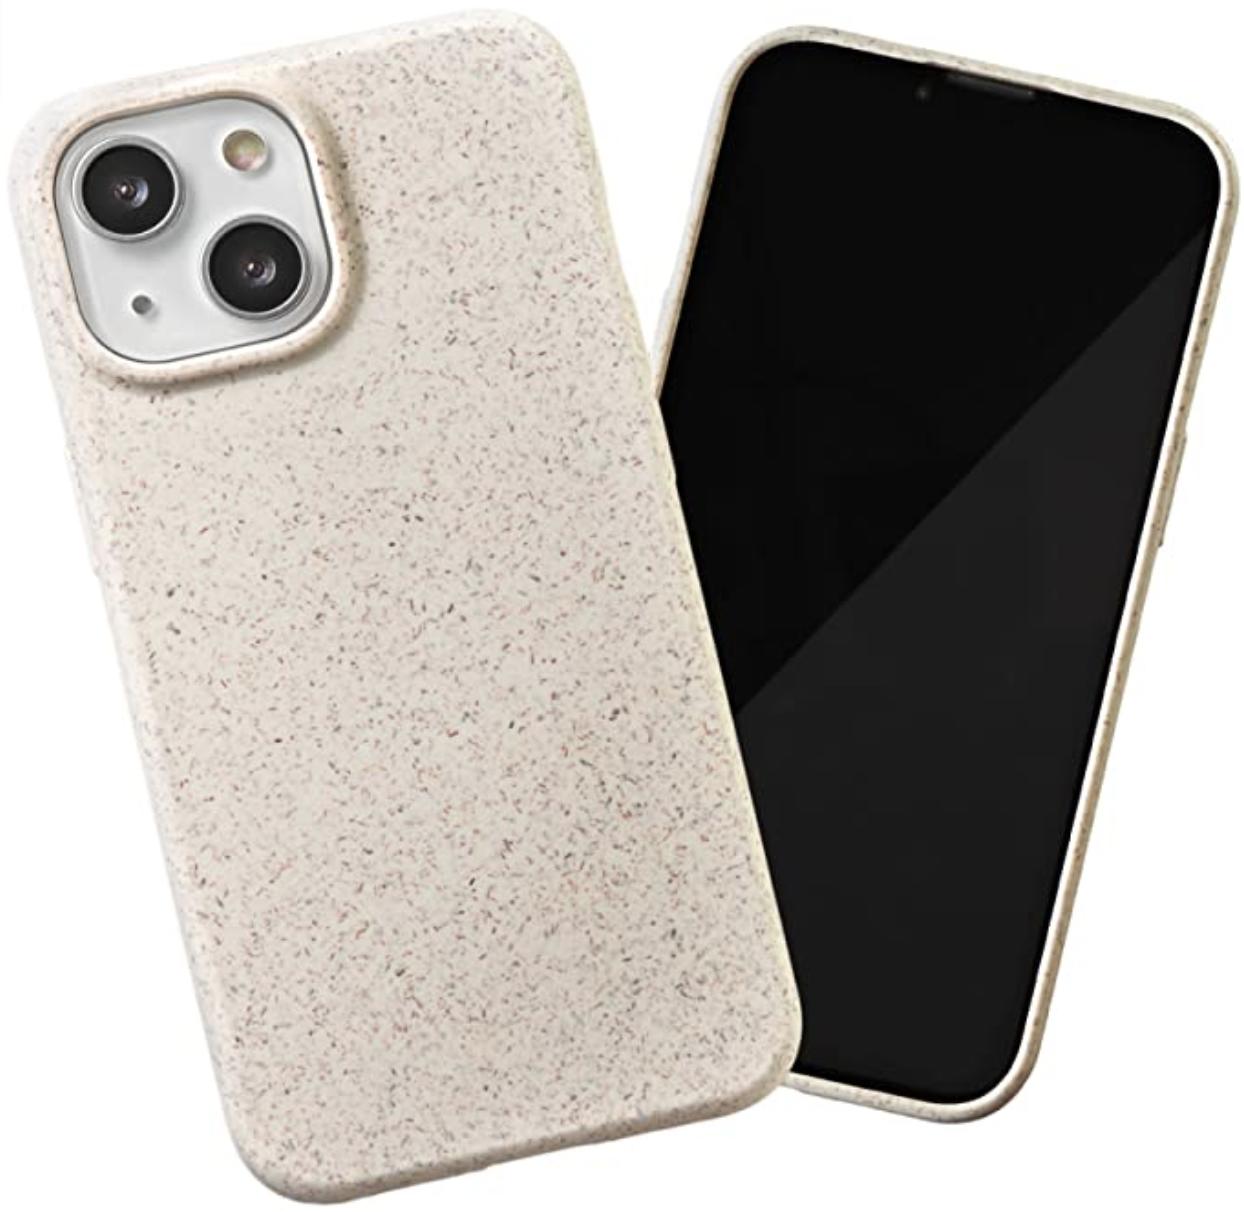 Steeplab Eco Warrior Case Iphone 13 Mini Render Cropped